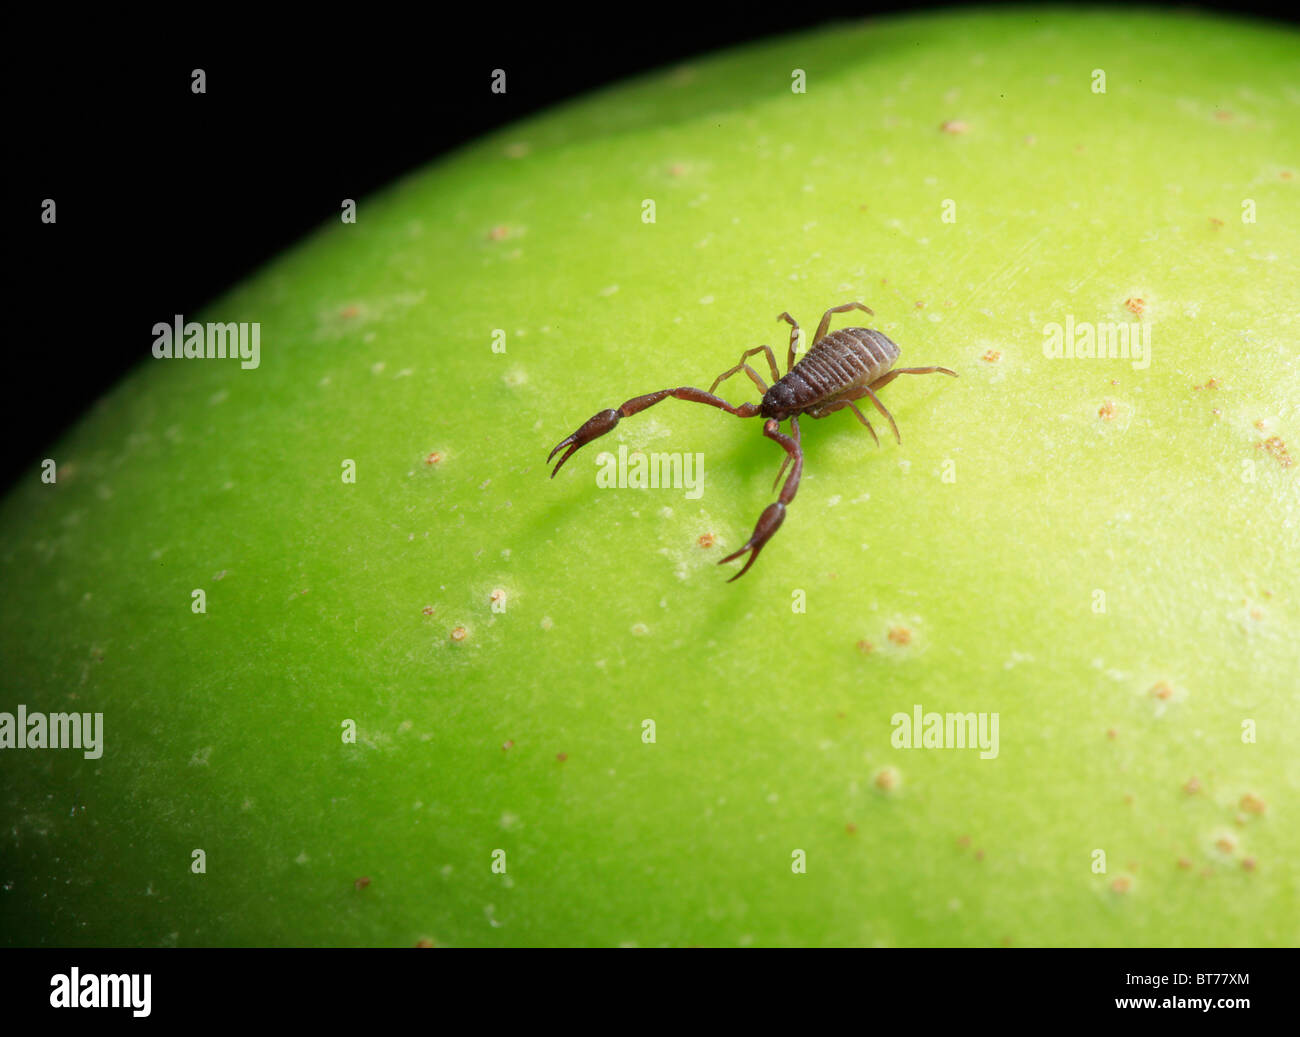 Pseudoscorpion (Chelifer cancroides) on green surface Stock Photo